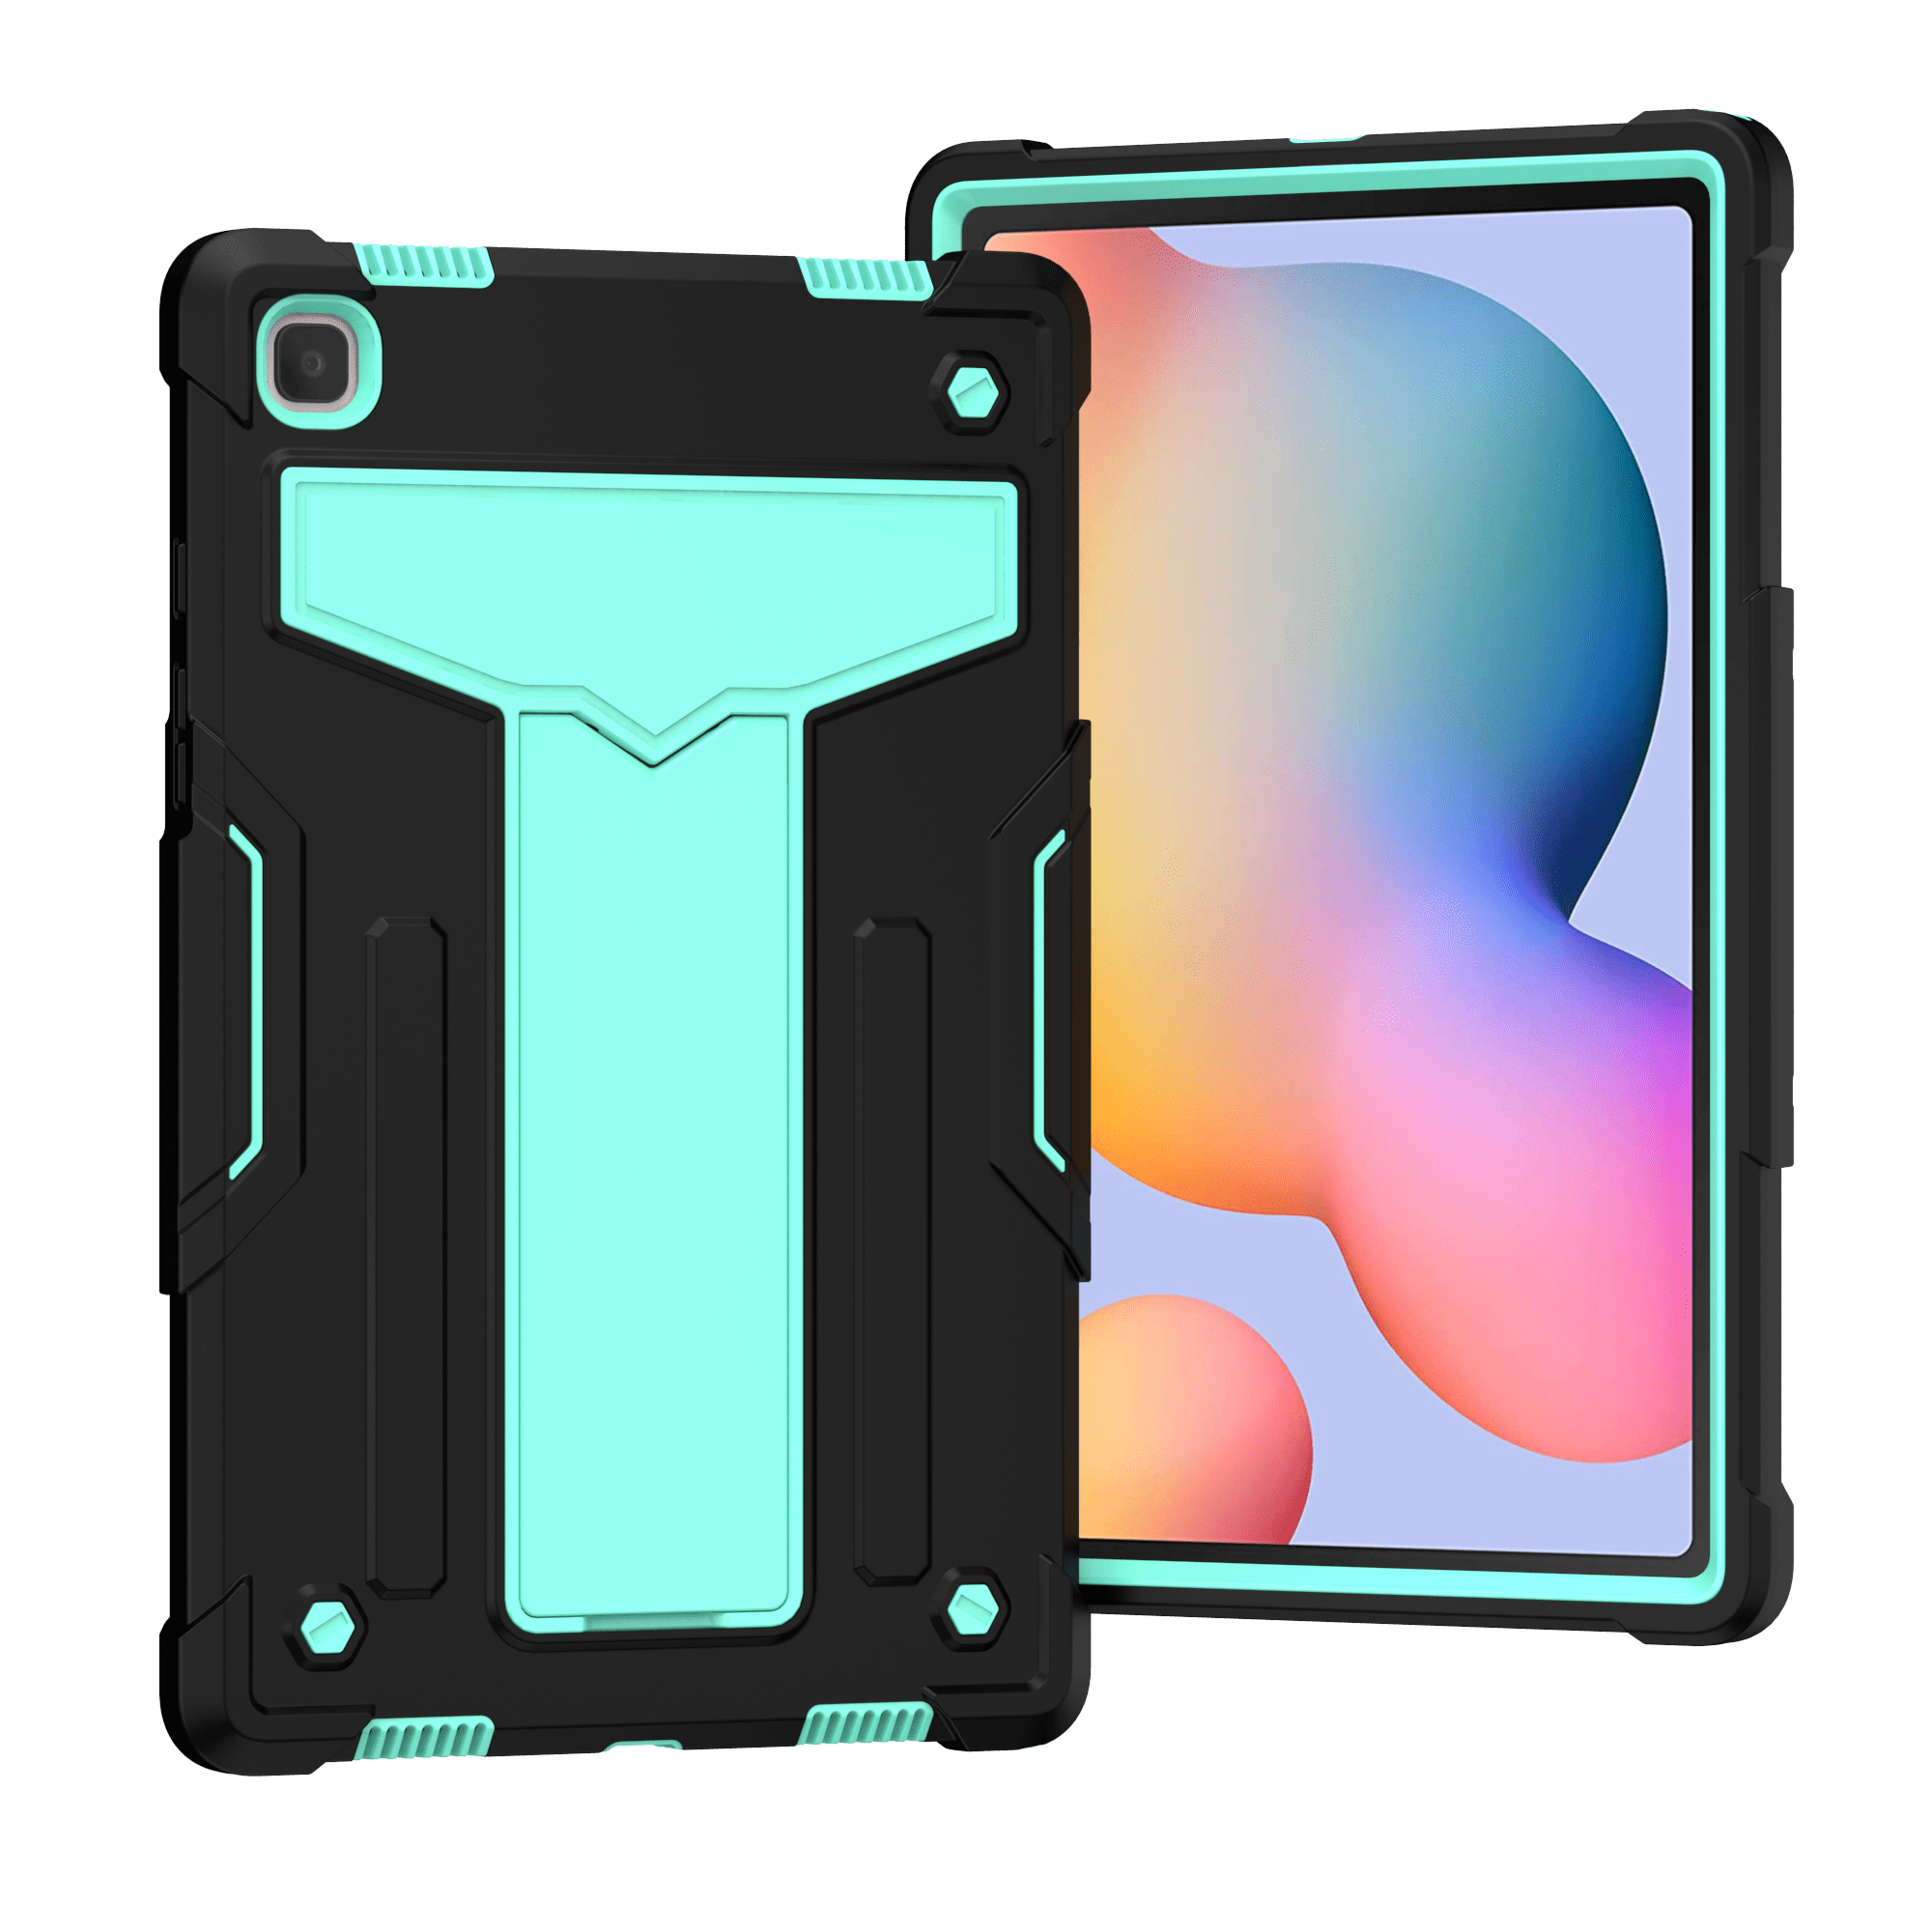 Rose Pink Light Weight Shockproof Handle Stand Protective Case for Tab A7 10.4 Inch 2020 Surom Kids Case with Built-in Screen Protector for Samsung Galaxy Tab A7 10.4 2020 Model SM-T500/T505/T507